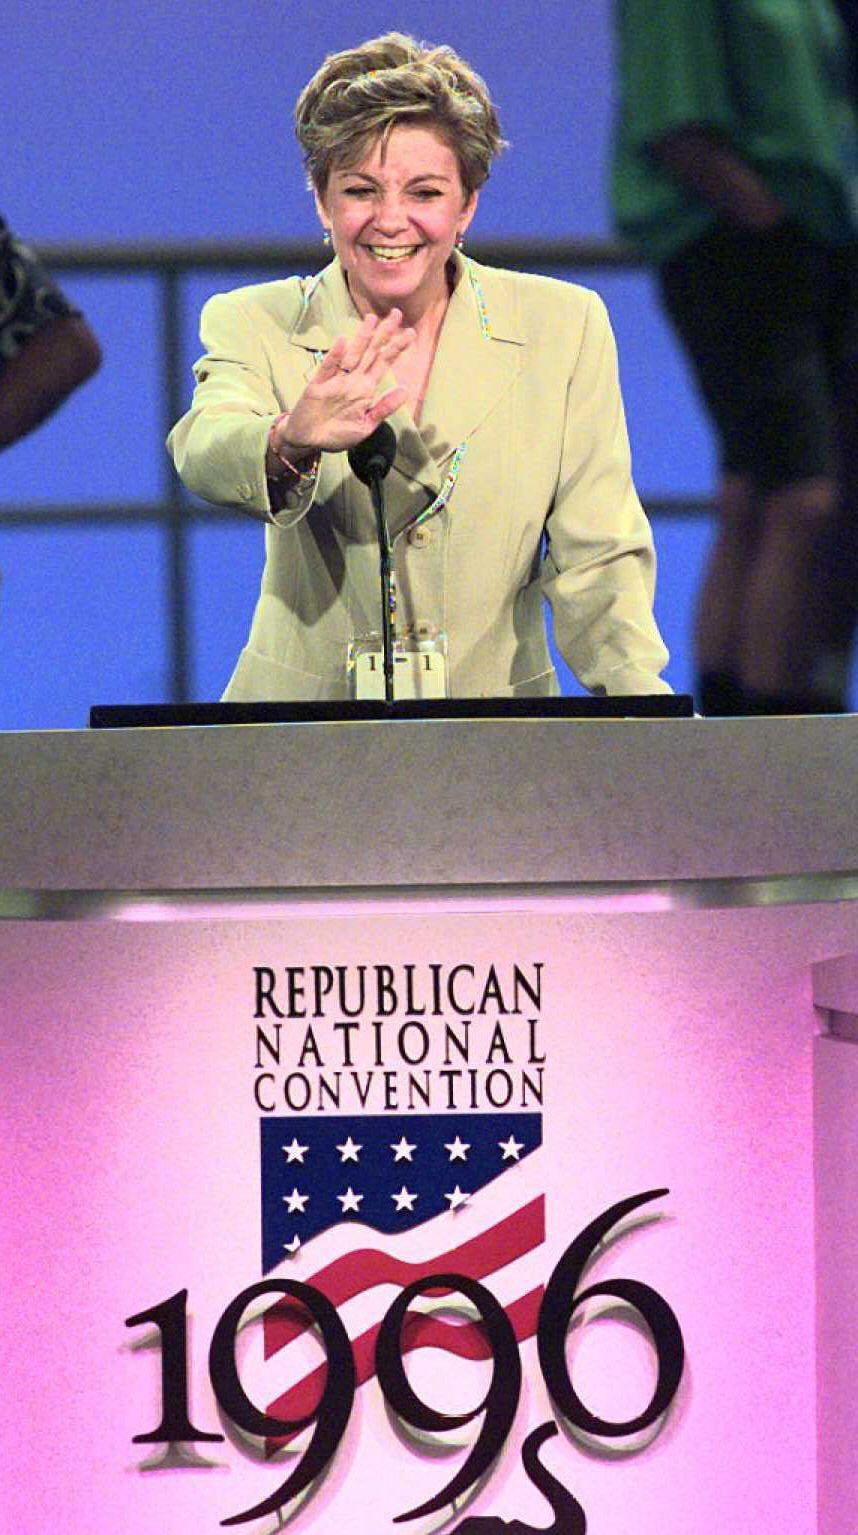 san diego, ca   july 22  us rep susan molinari, r ny, waves from the podium 11 august during preparations for the republican national convention in san diego the  convention begins 12 august electronic image  photo credit should read luke frazzaafp via getty images